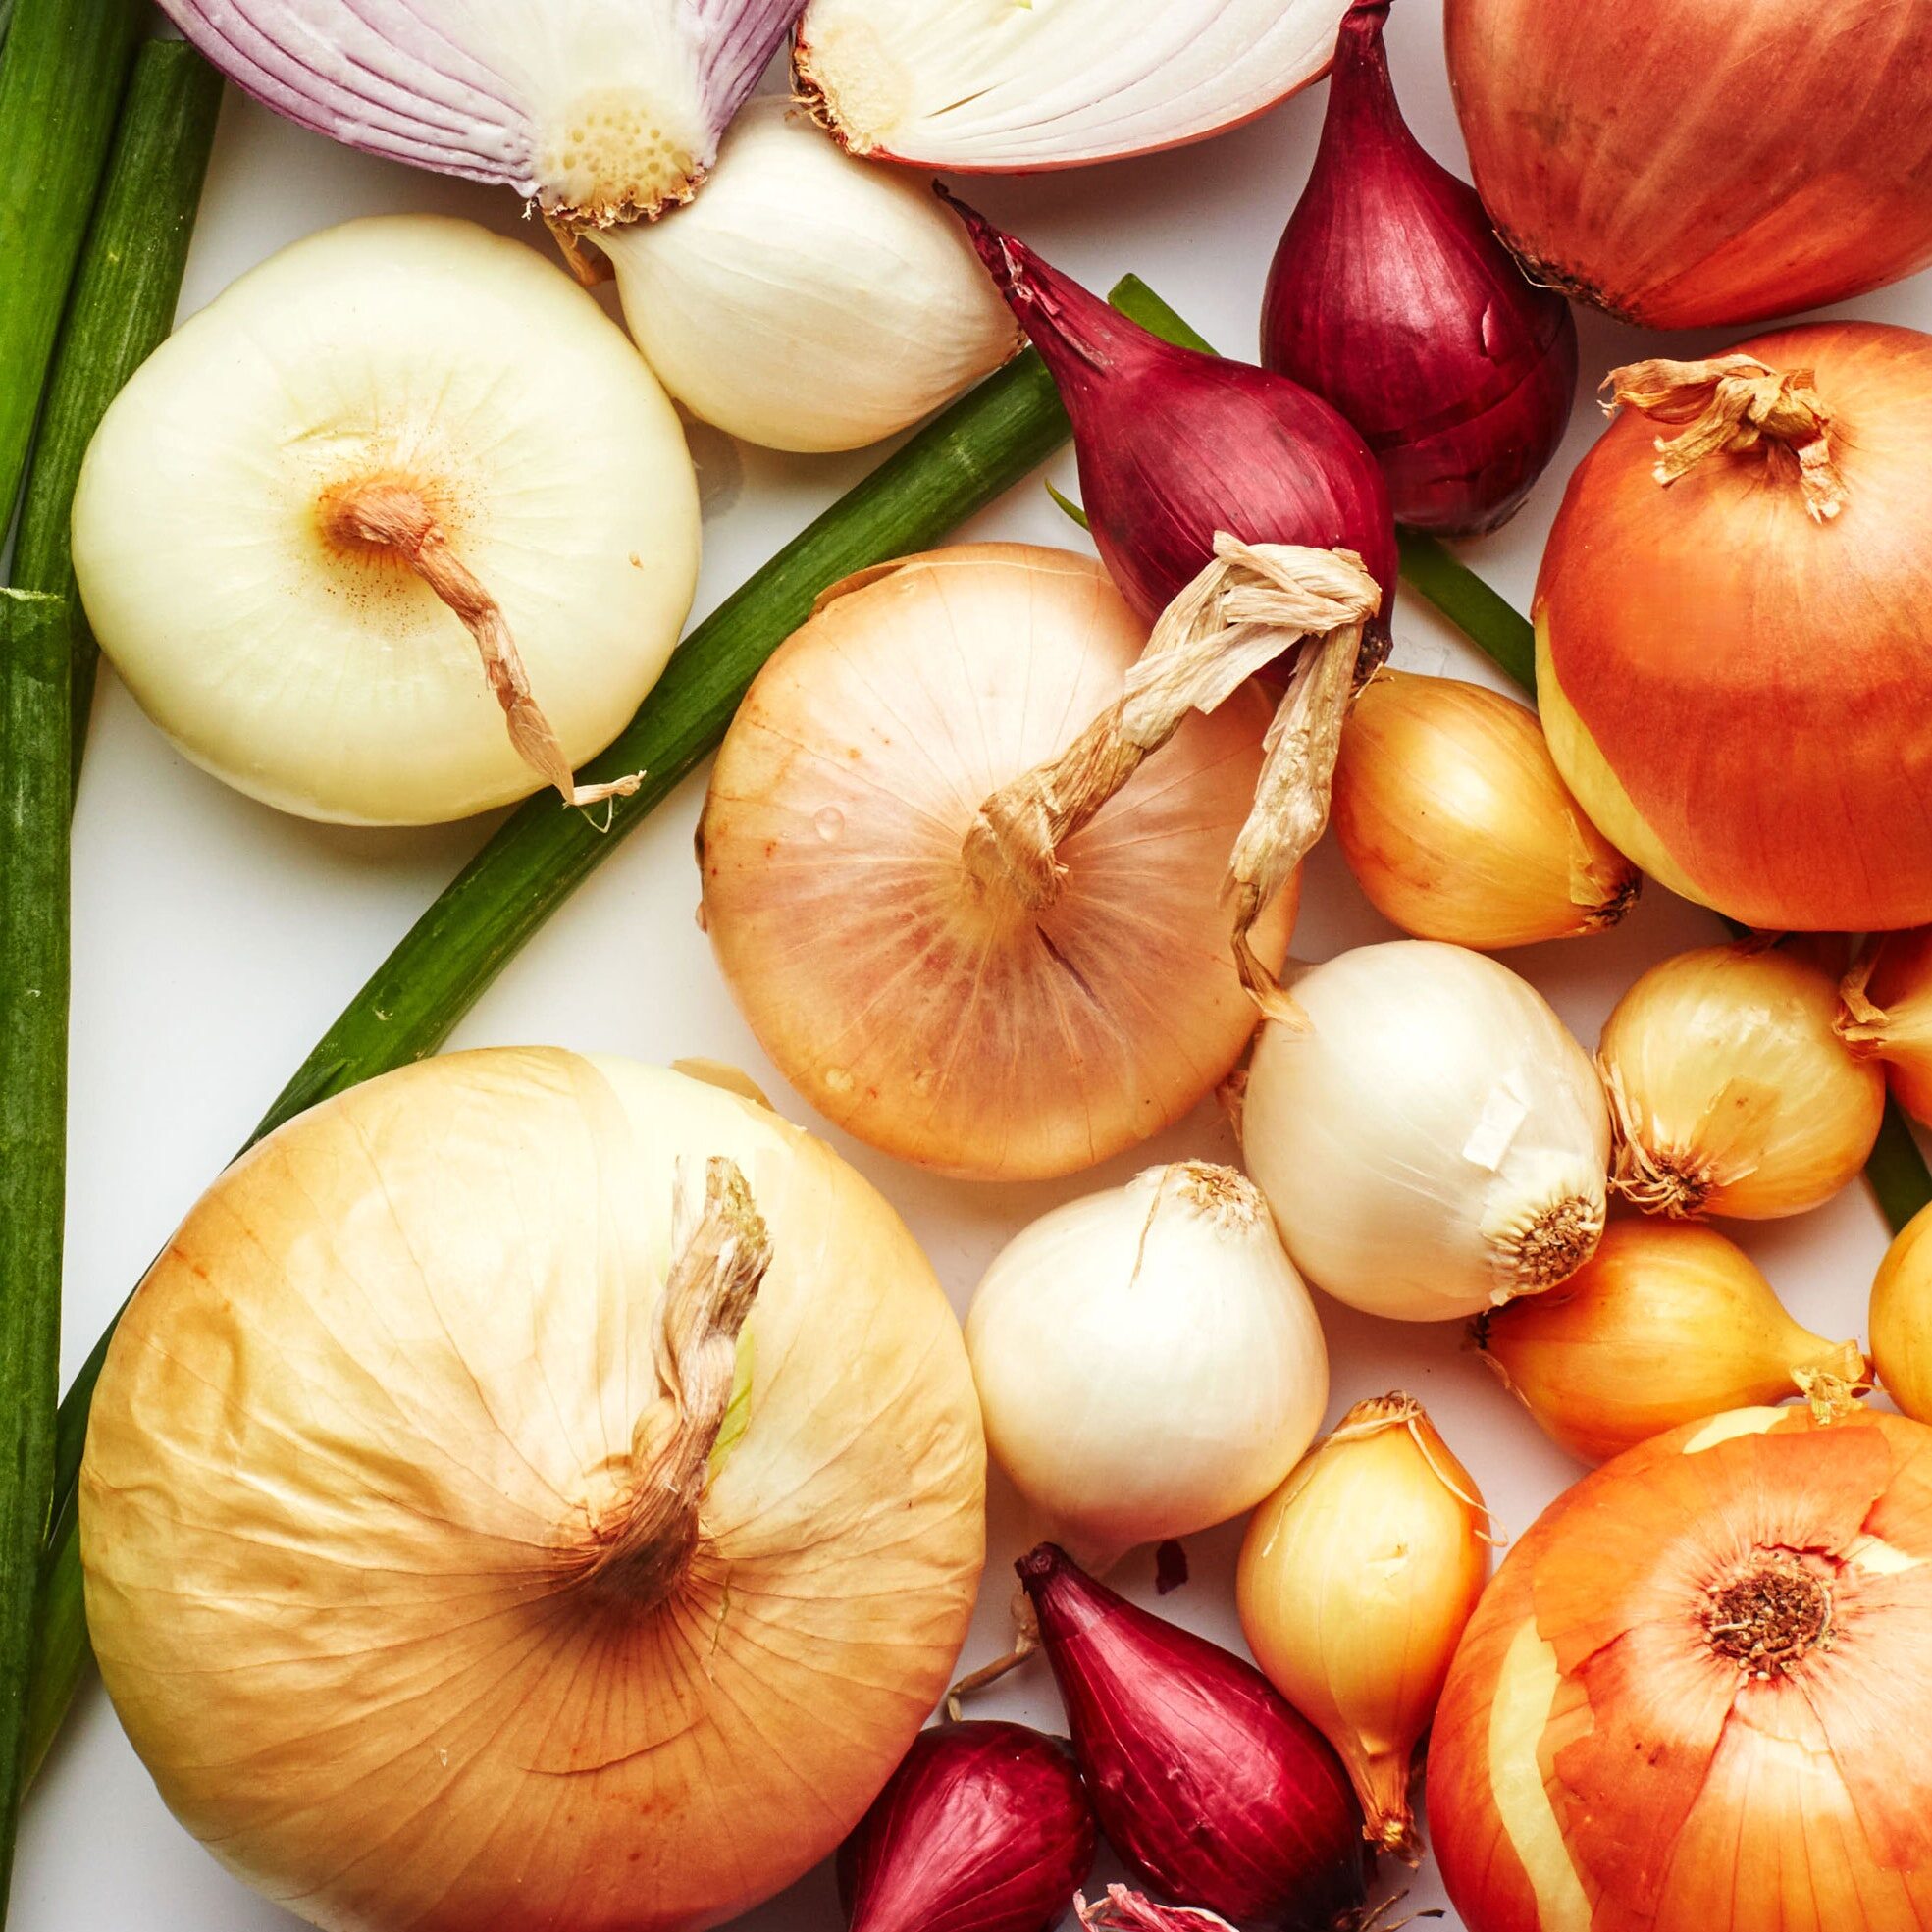 The types of onions and the differences between them